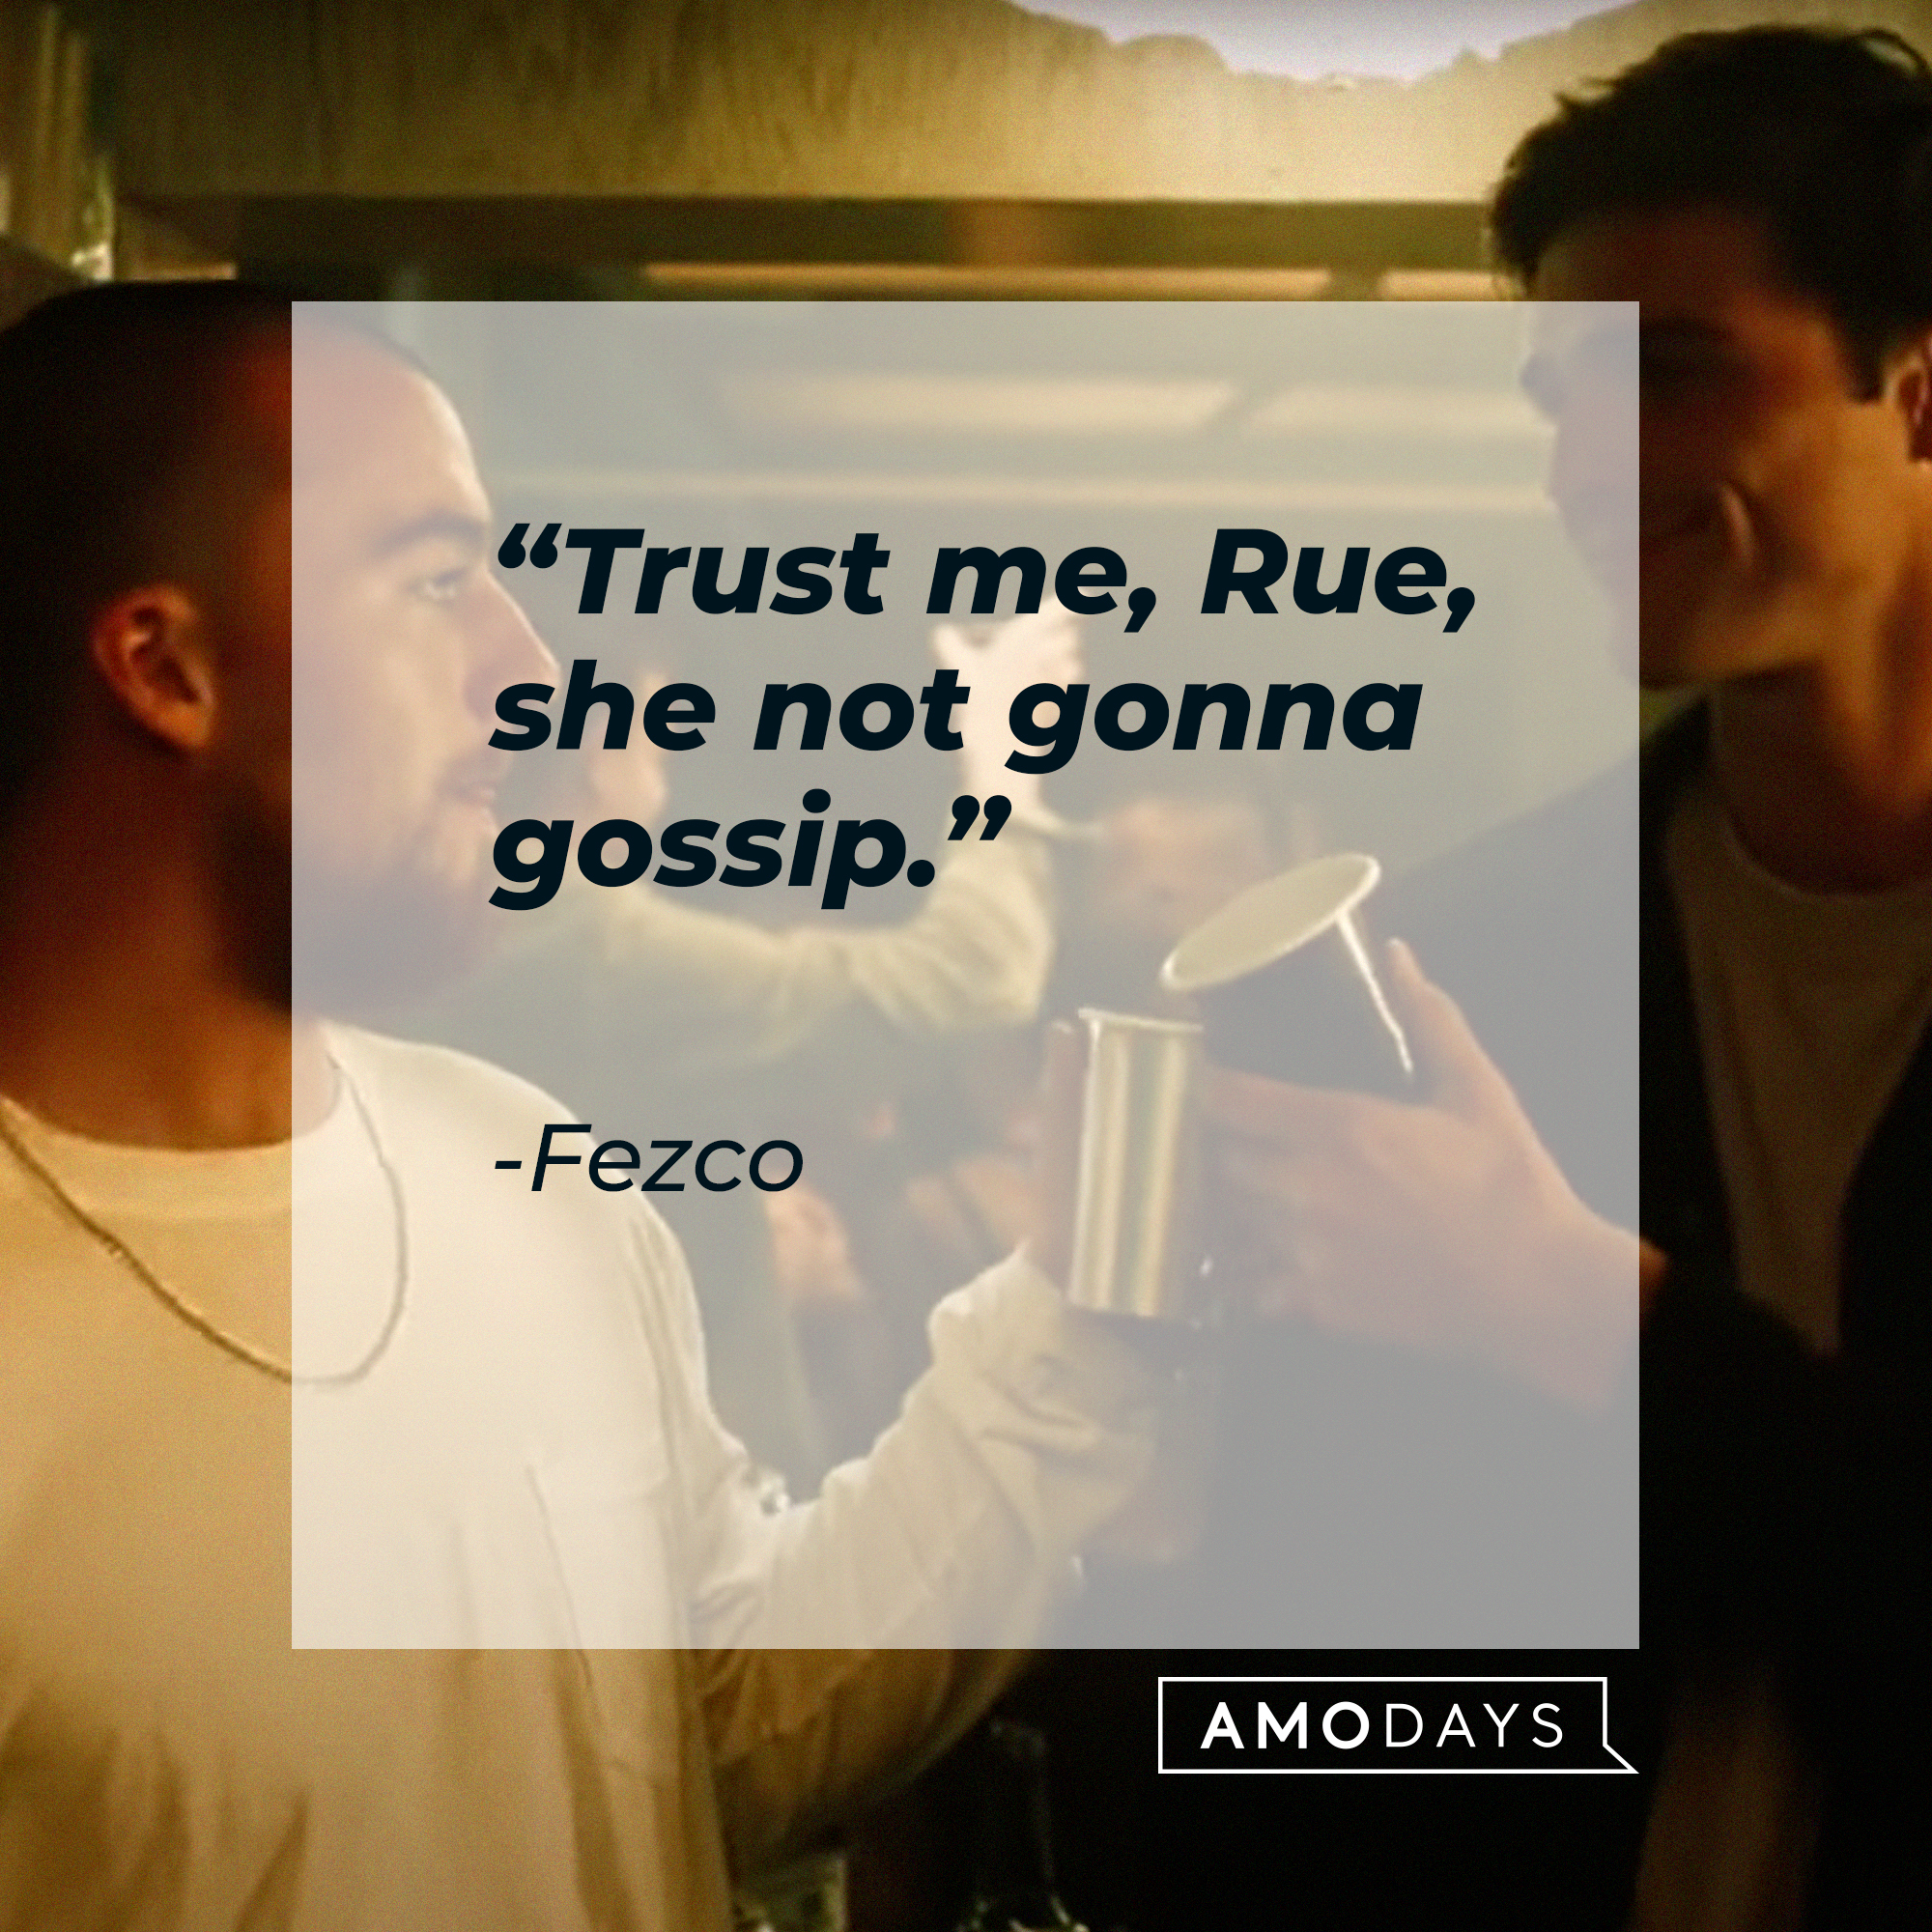 Fezco and Nate, with Fezco’s quote: “Trust me, Rue, she not gonna gossip.” | Source: youtube.com/EuphoriaHBO